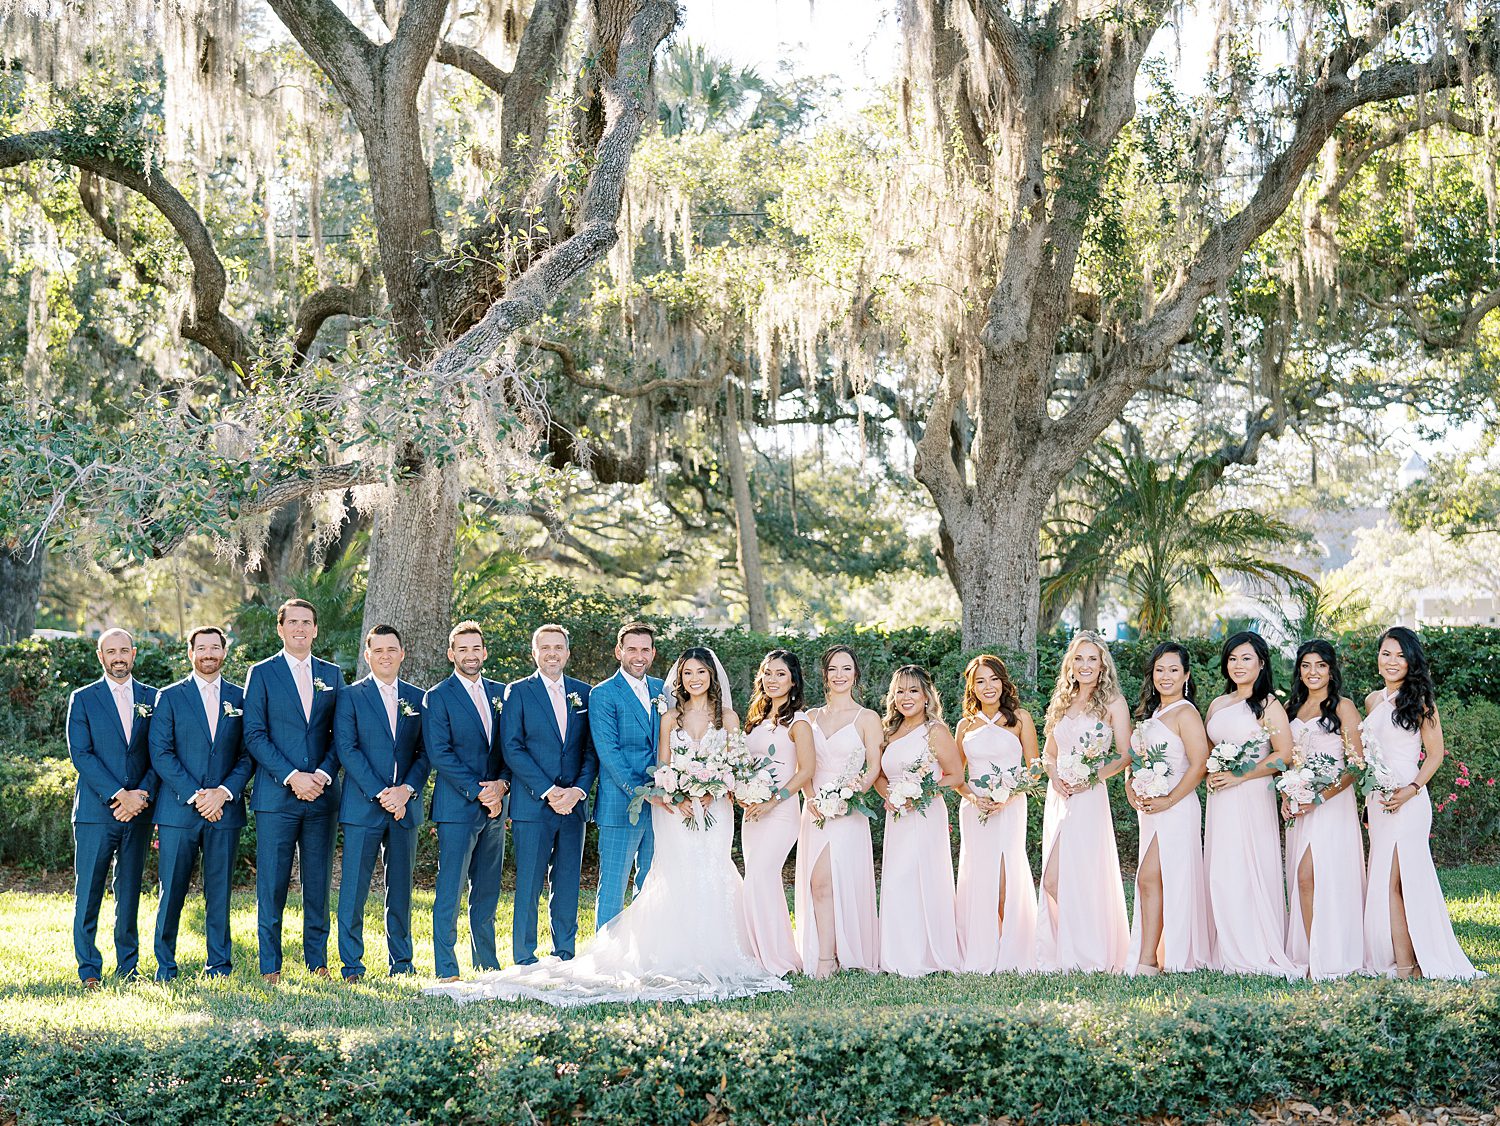 bride and groom pose with wedding party in blue suits and blush dresses at Tampa Yacht Club